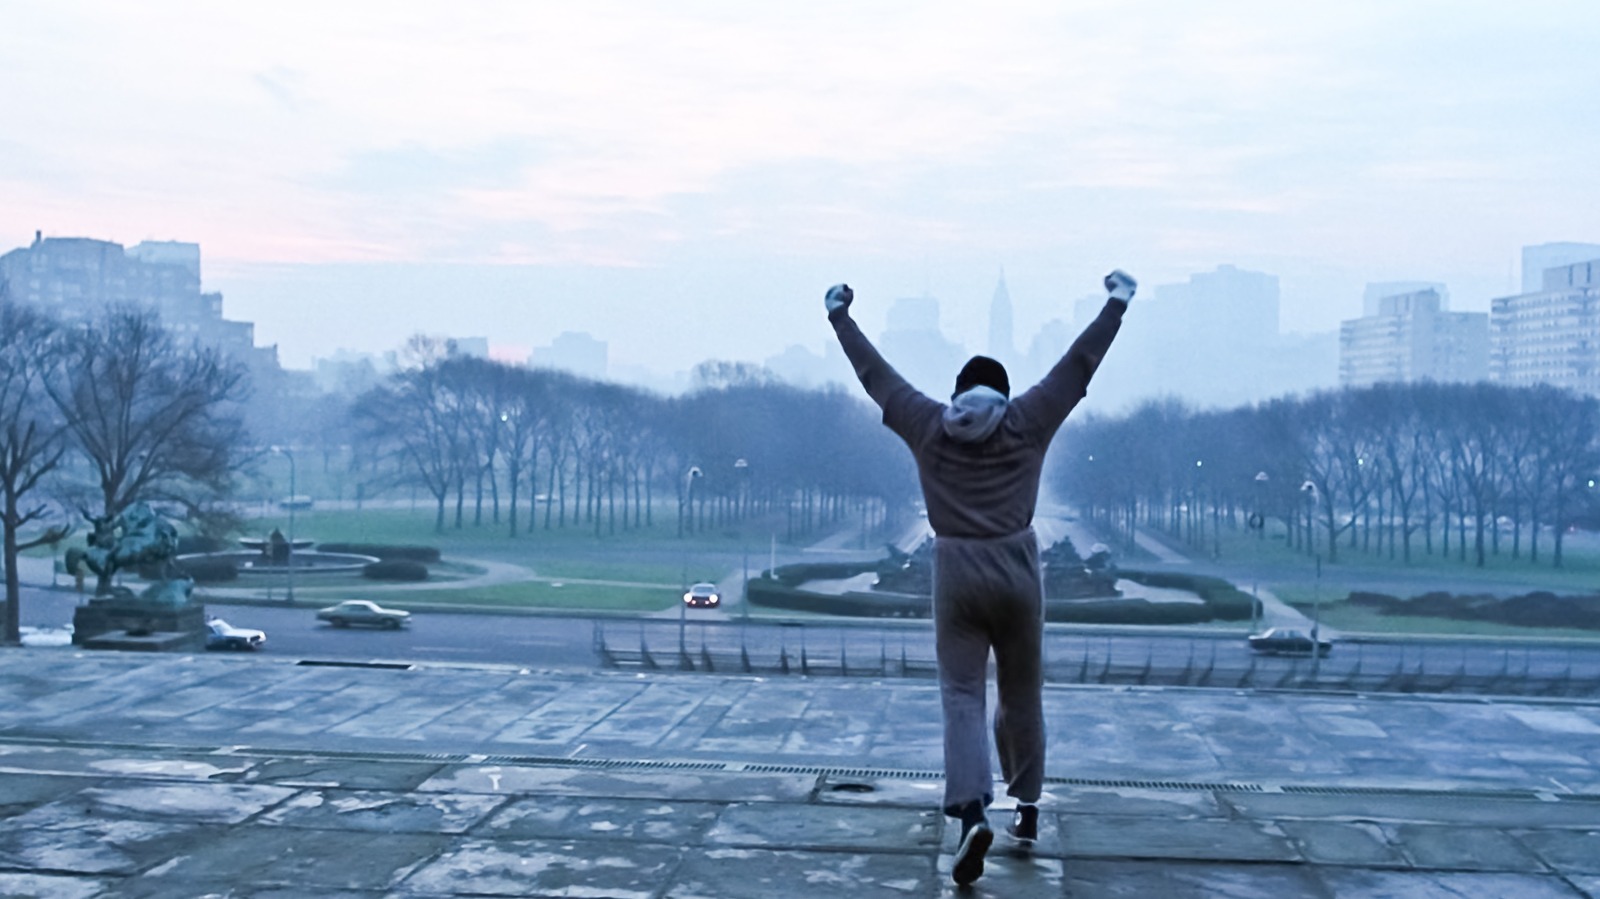 Rocky Ending Explained: Not Just Another Bum From The Neighborhood